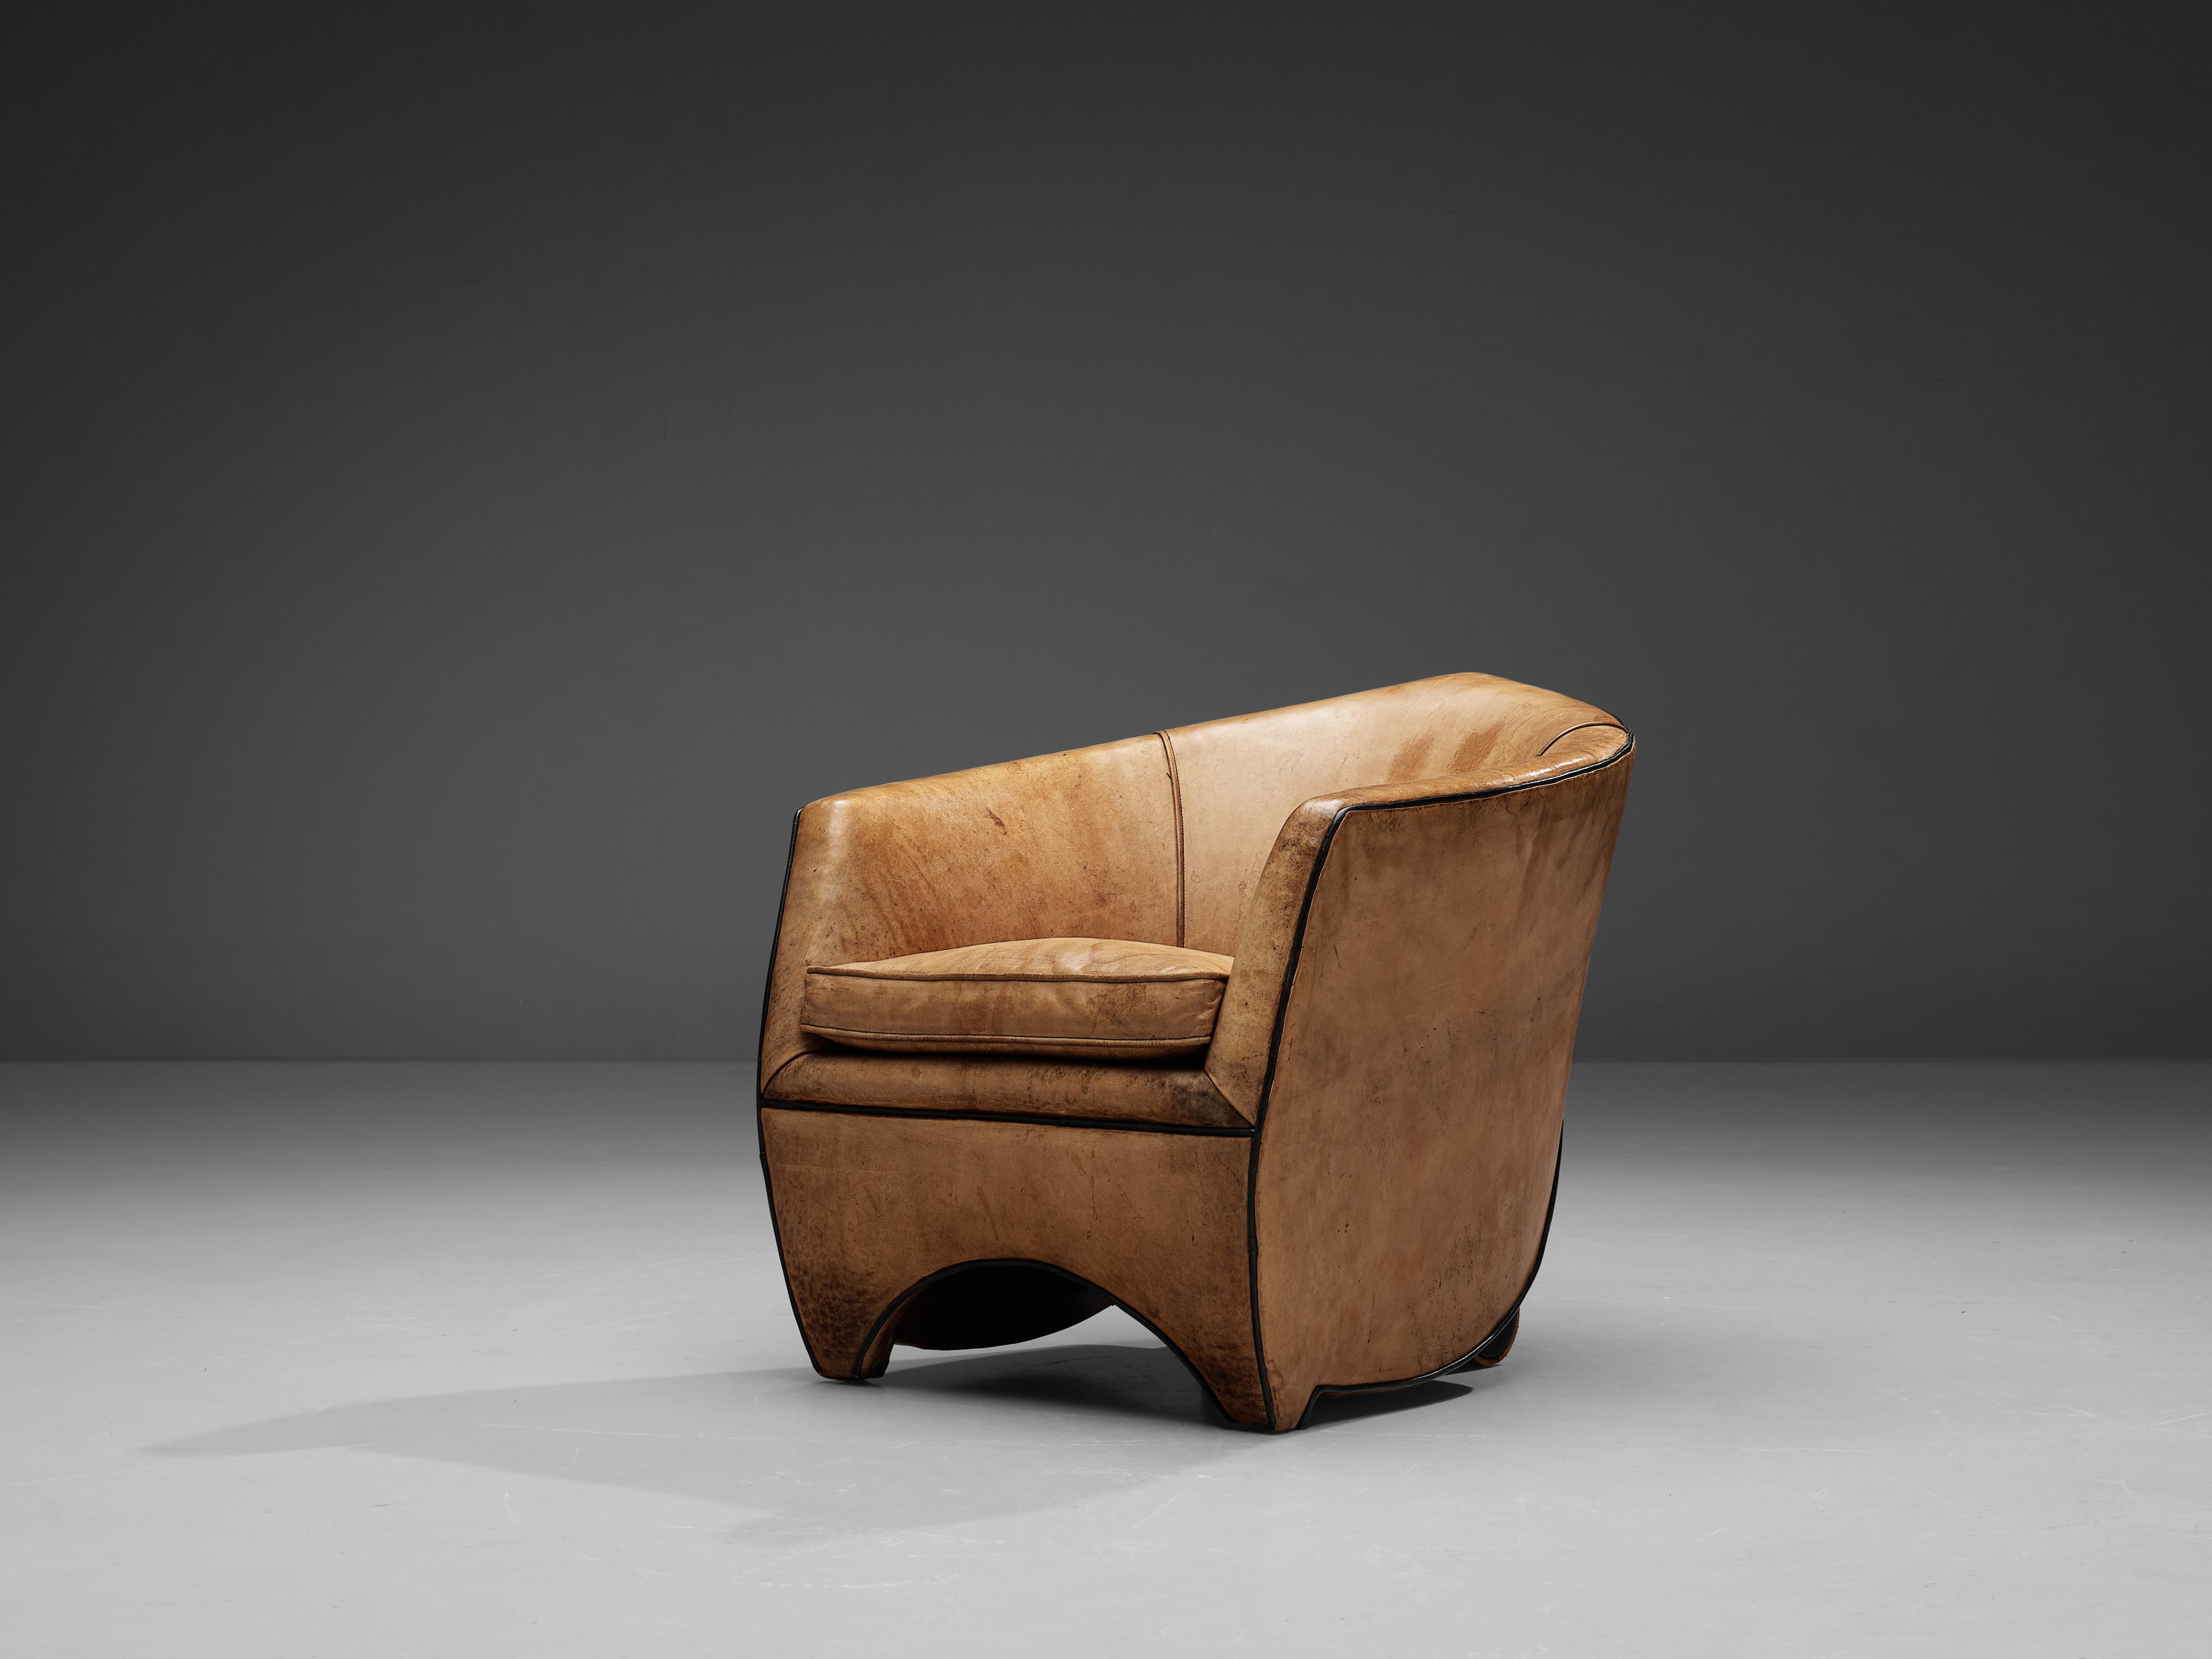 Bart van Bekhoven, 'cocoon' lounge chair, leather, The Netherlands, 1990s

Beautiful 'cocoon' lounge chair created by Dutch designer Bart van Bekhoven. A wide and comfortable chair in a cognac leather upholstery. Truly extraordinary design that has